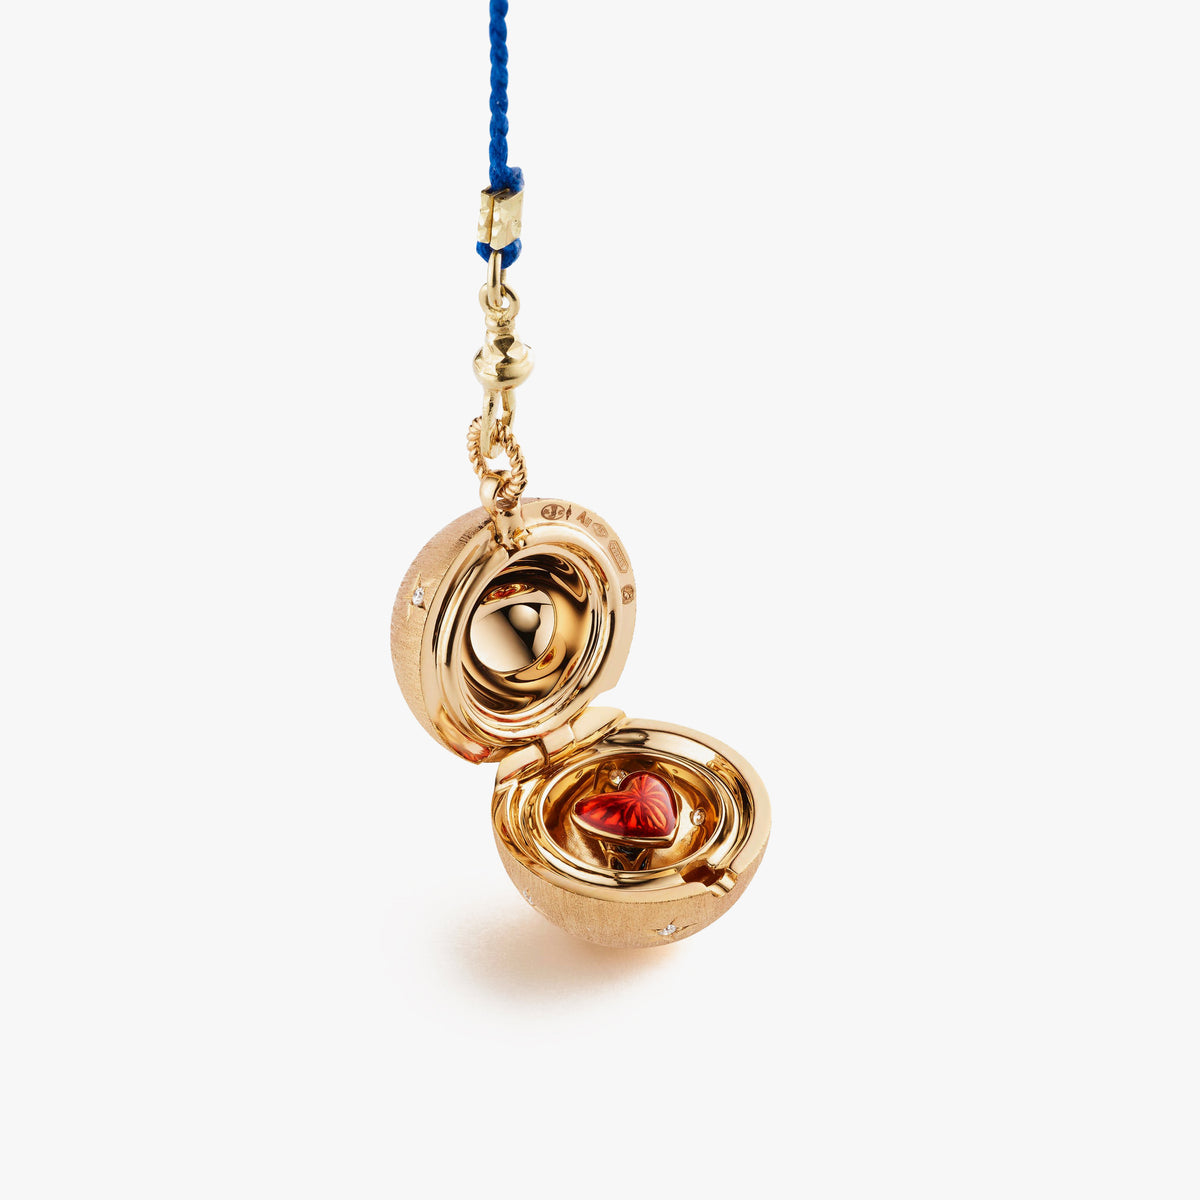 Heartbeat 18k rose gold orb locket with diamonds on a multi-colored Mauli pearl necklace